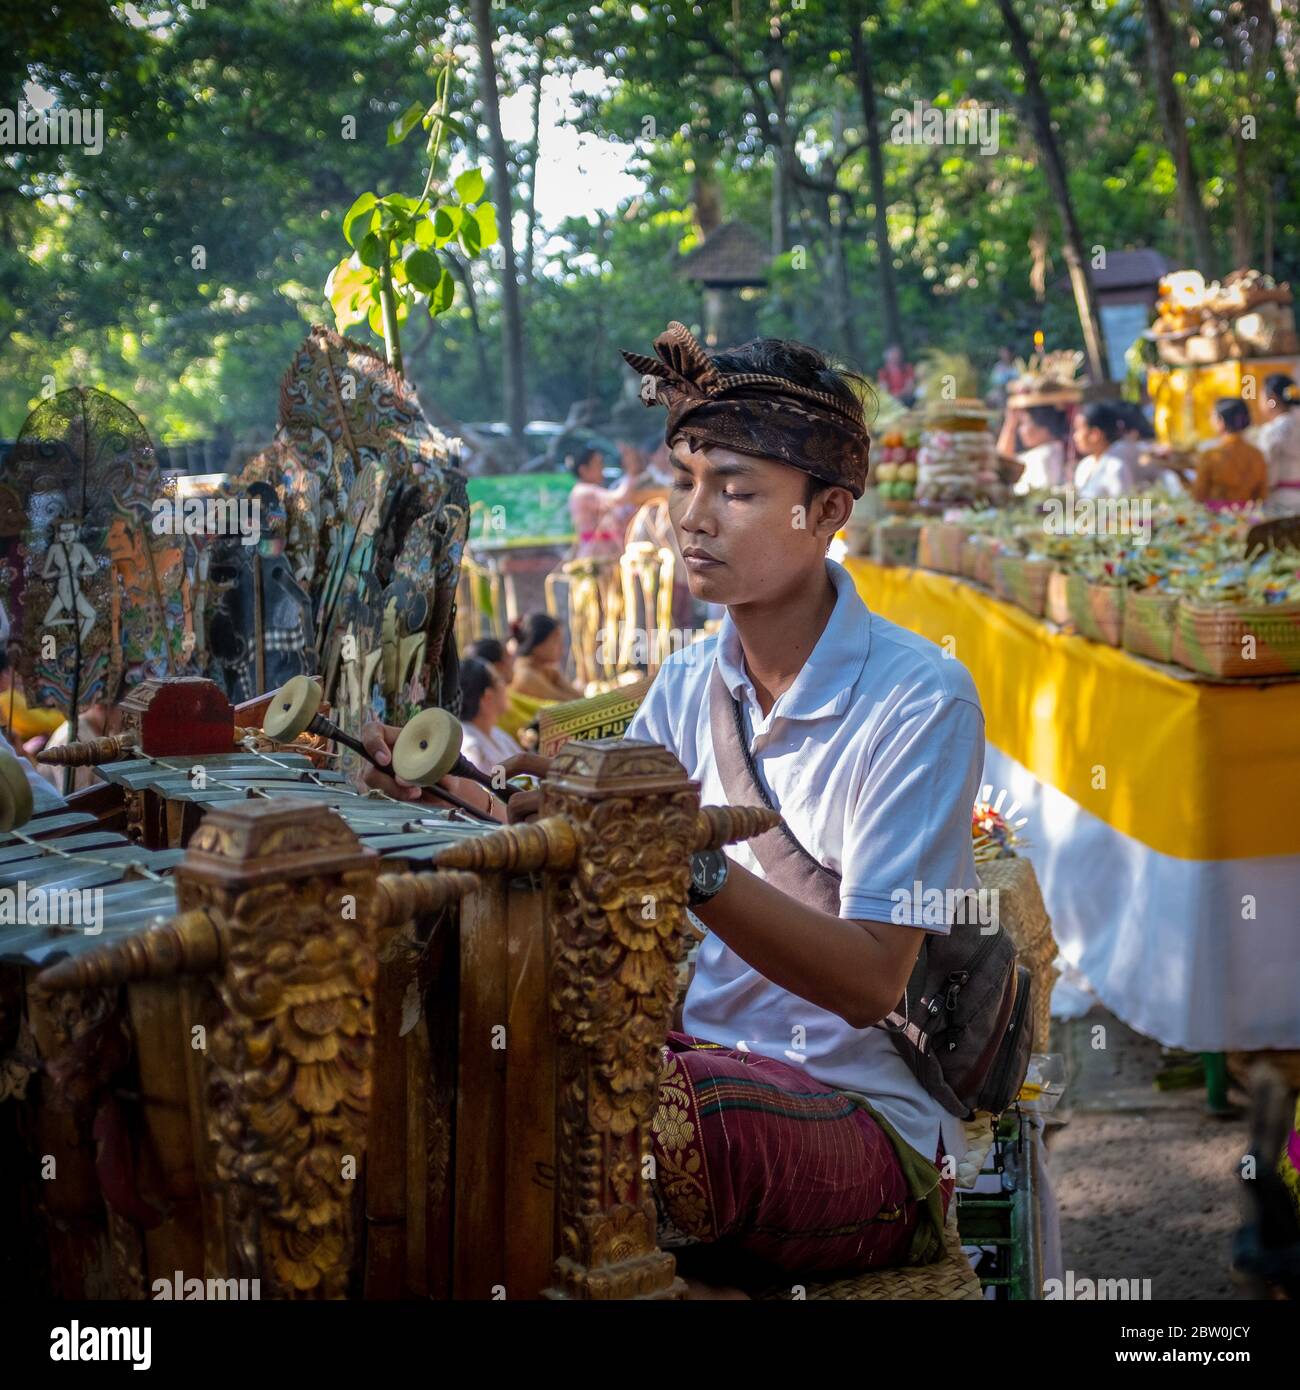 Ubud, Bali, Indonesia - May 5, 2018: Young traditional musical instrument man player, wearing traditional clothing with an ongoing ceremony in the bac Stock Photo